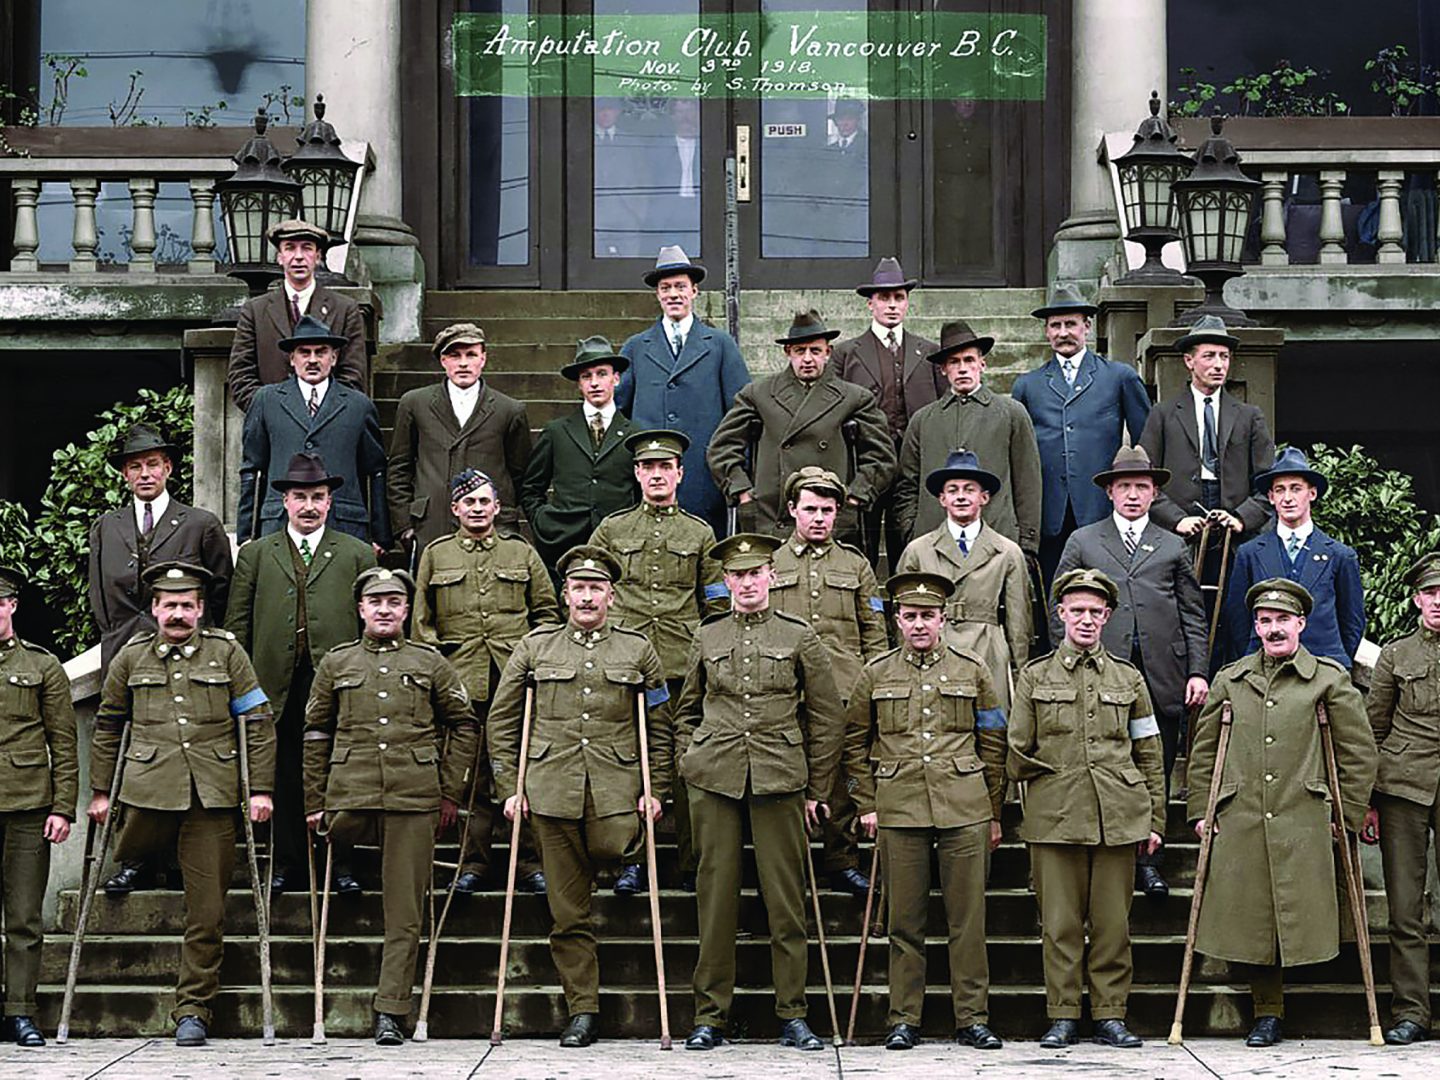 The origins of the War Amps trace back to Sept. 23, 1918, when the Amputation Club of British Columbia held its first meeting. (Courtesy of the War Amps)